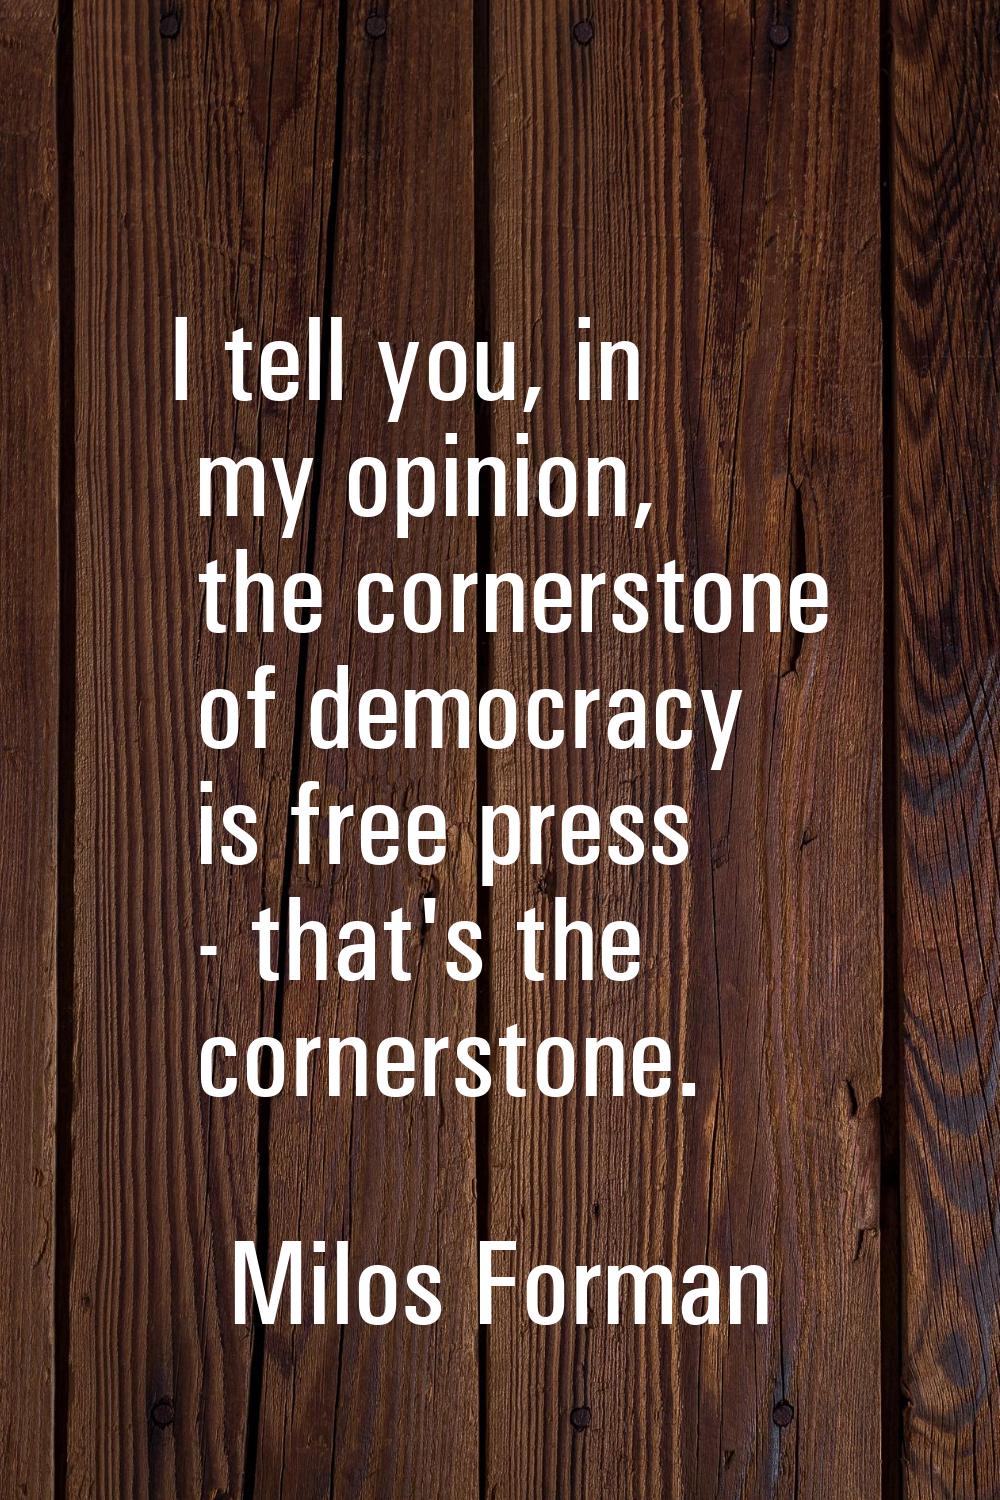 I tell you, in my opinion, the cornerstone of democracy is free press - that's the cornerstone.